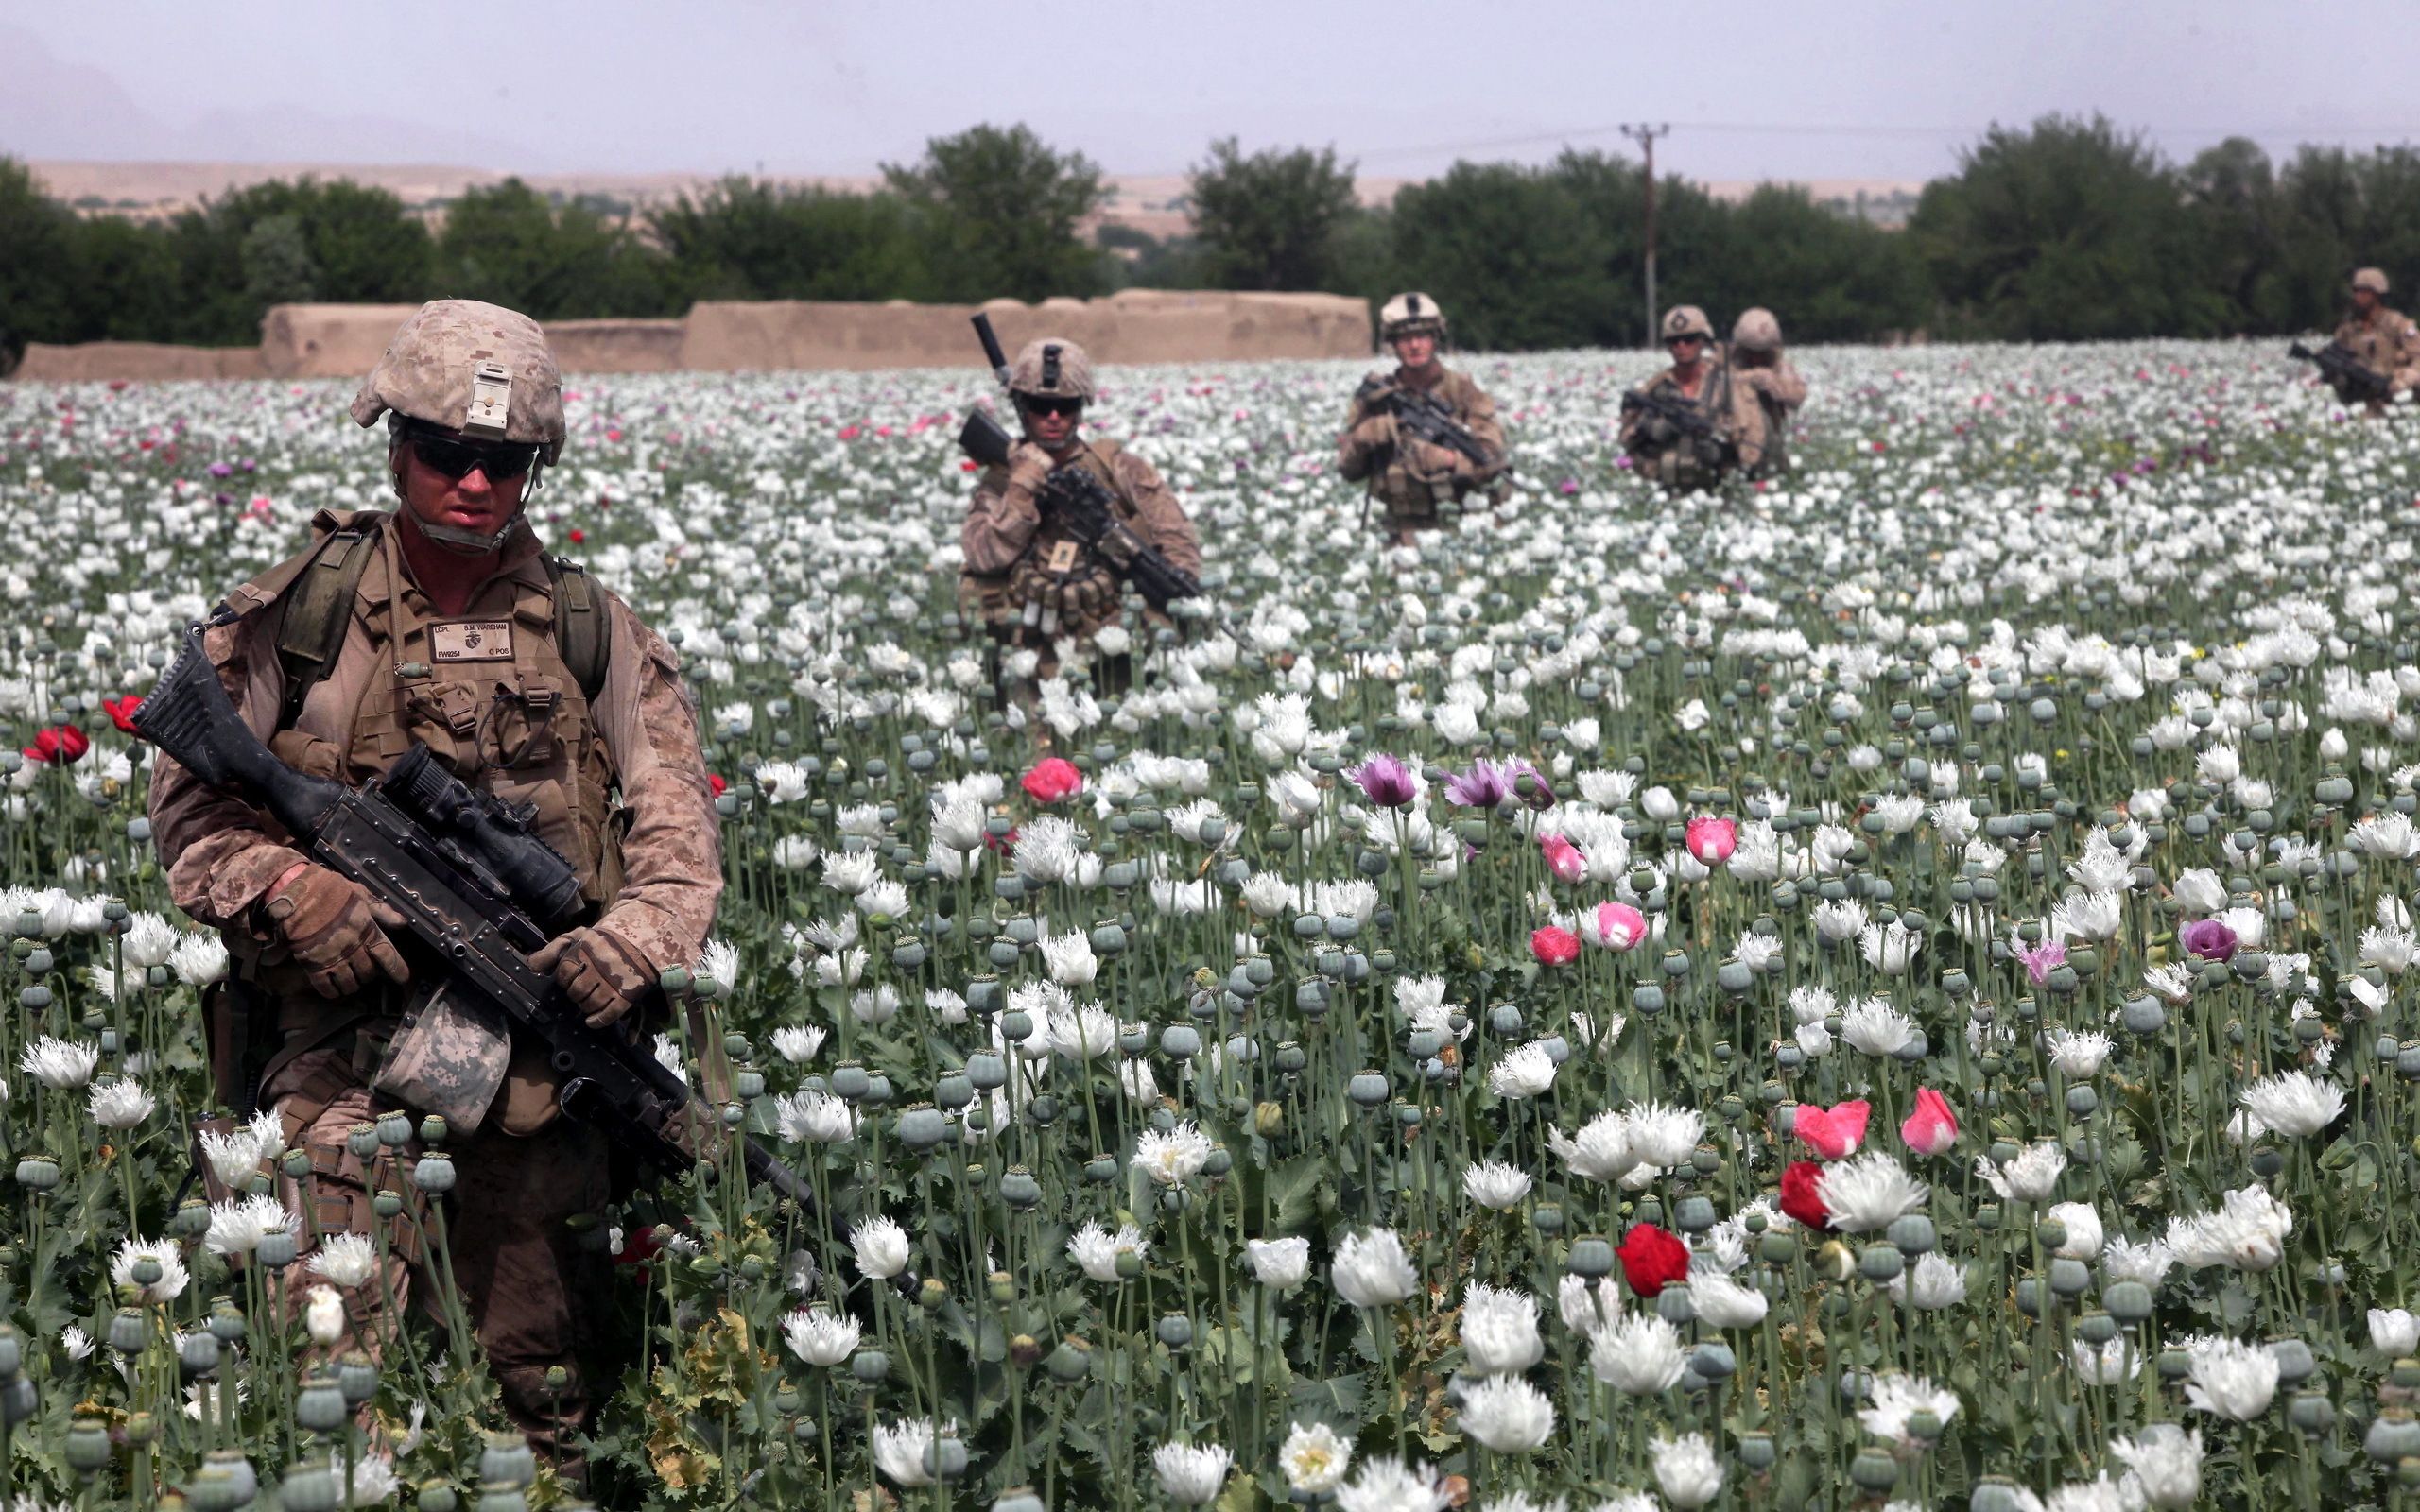 Soldiers in a poppy field wallpapers and images - wallpapers